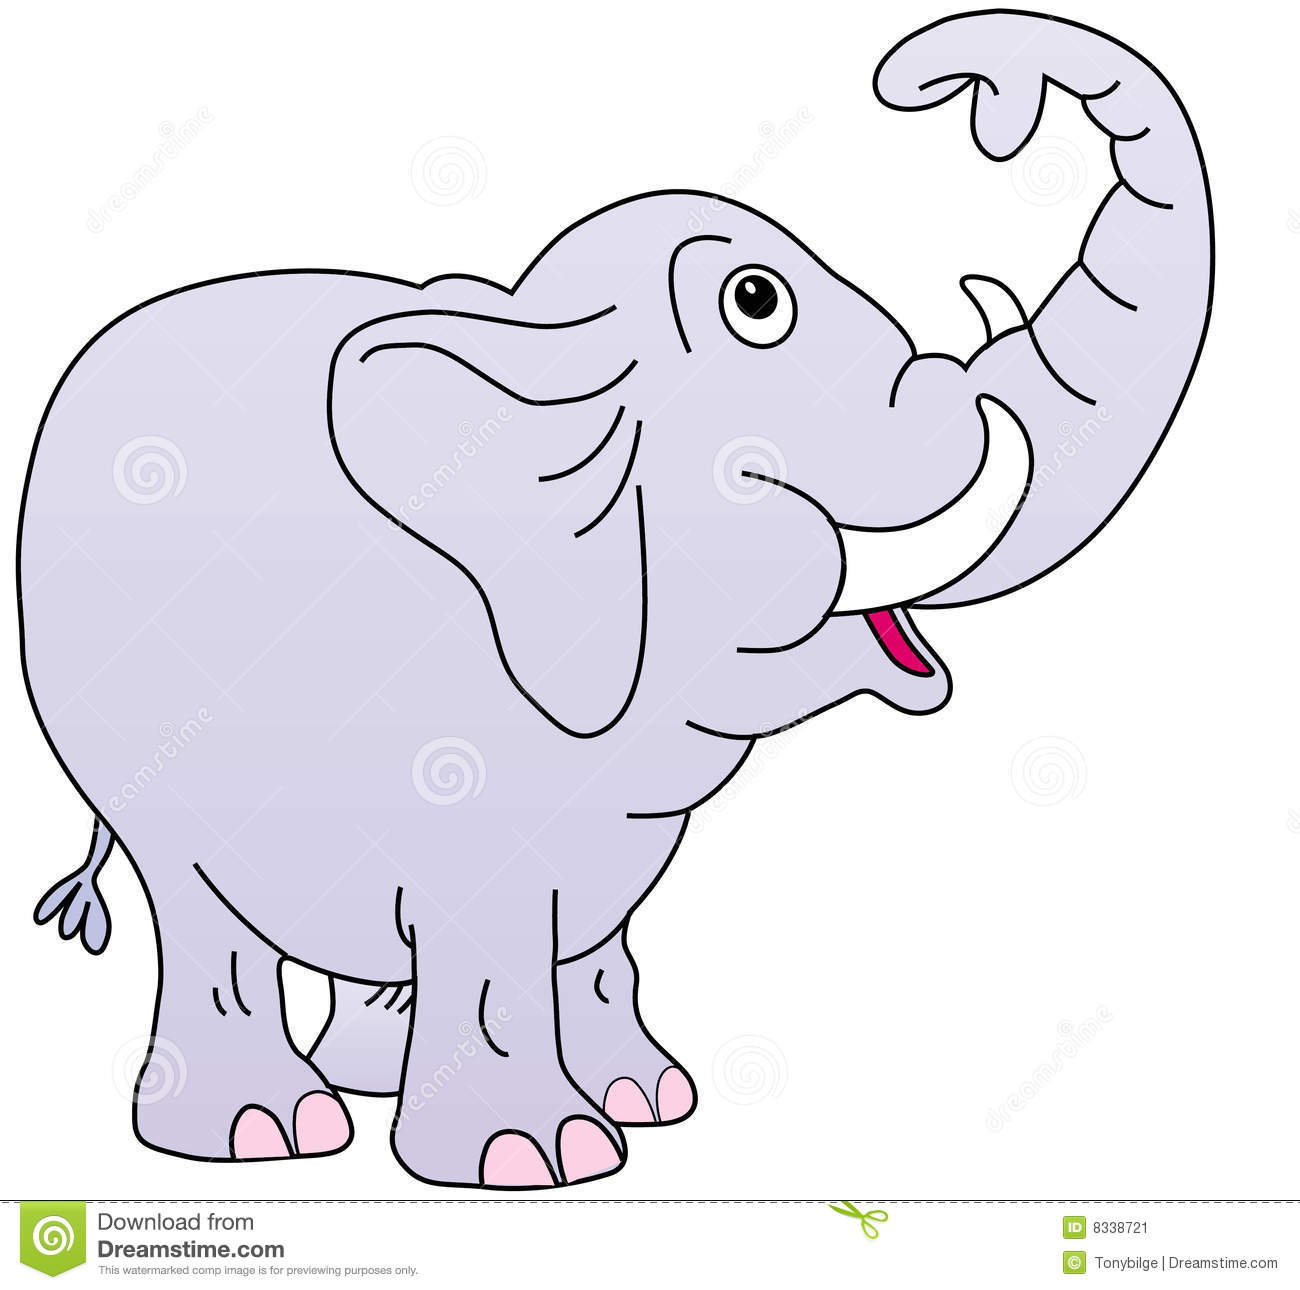 Elephant trunk clipart 4 » Clipart Station.